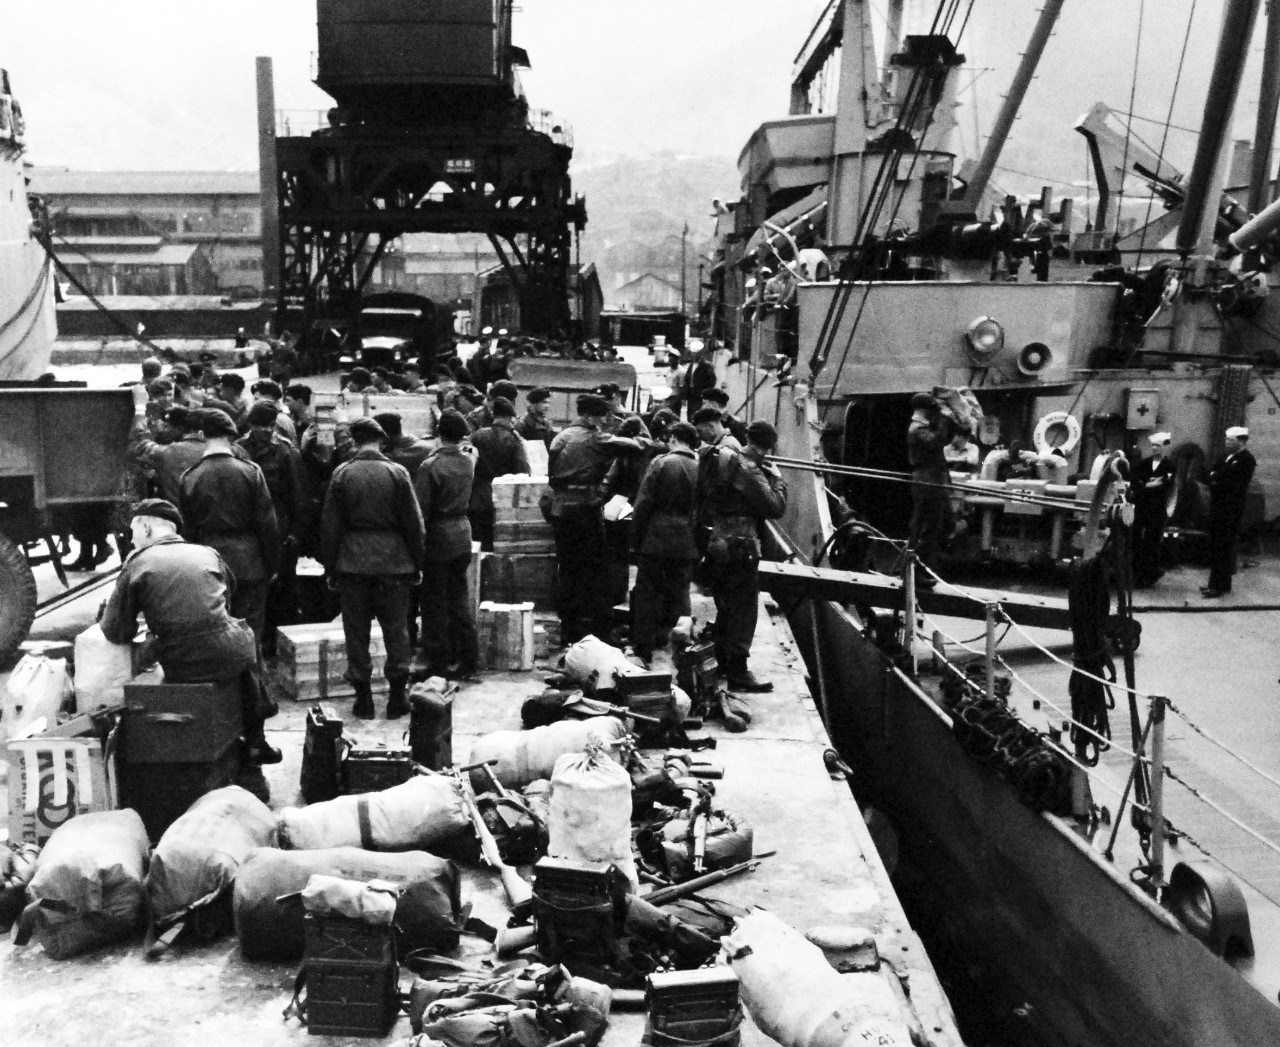 USS Fort Marion (LSD-22), 1951.    British Royal Marines load their supplies and equipment on board USS Fort Marion (LSD-22) at Sasebo, Japan, prior to a “Commando Raid” at Sonjin, Korea, to destroy enemy rail and supply lines.  Photograph received May 1951.  Official U.S. Navy Photograph, now in the collections of the National Archives.  (2014/02/20).  